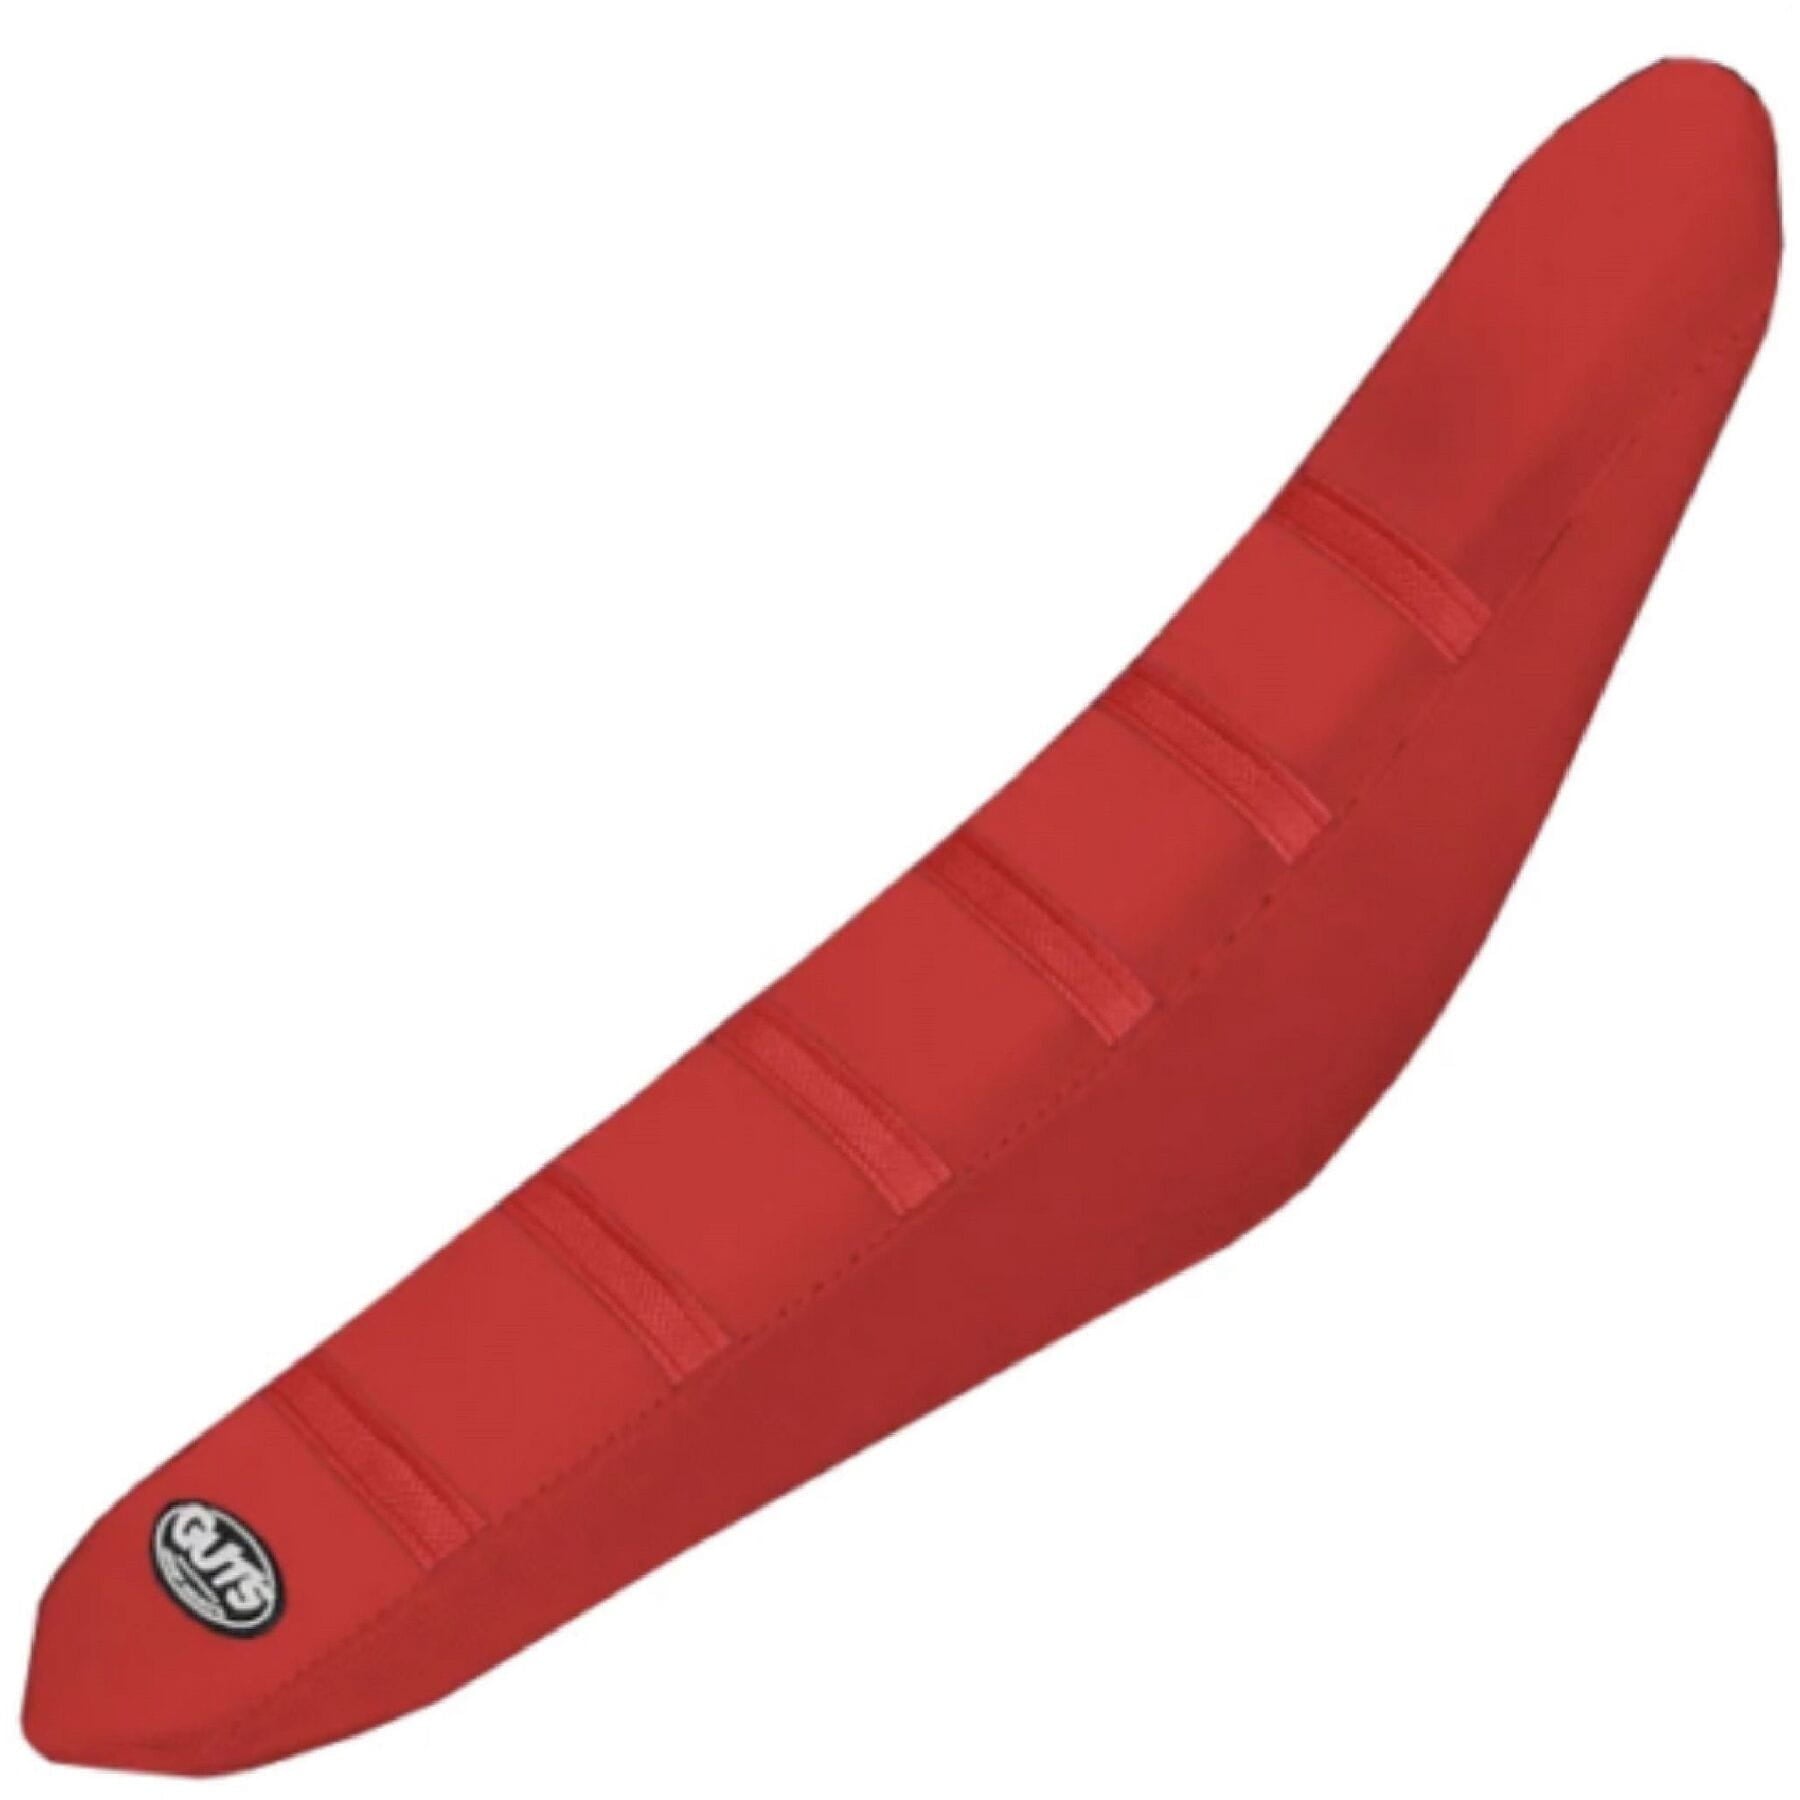 Guts Ribbed Velcro Cover Red/Red Ribs MC 65 21-24